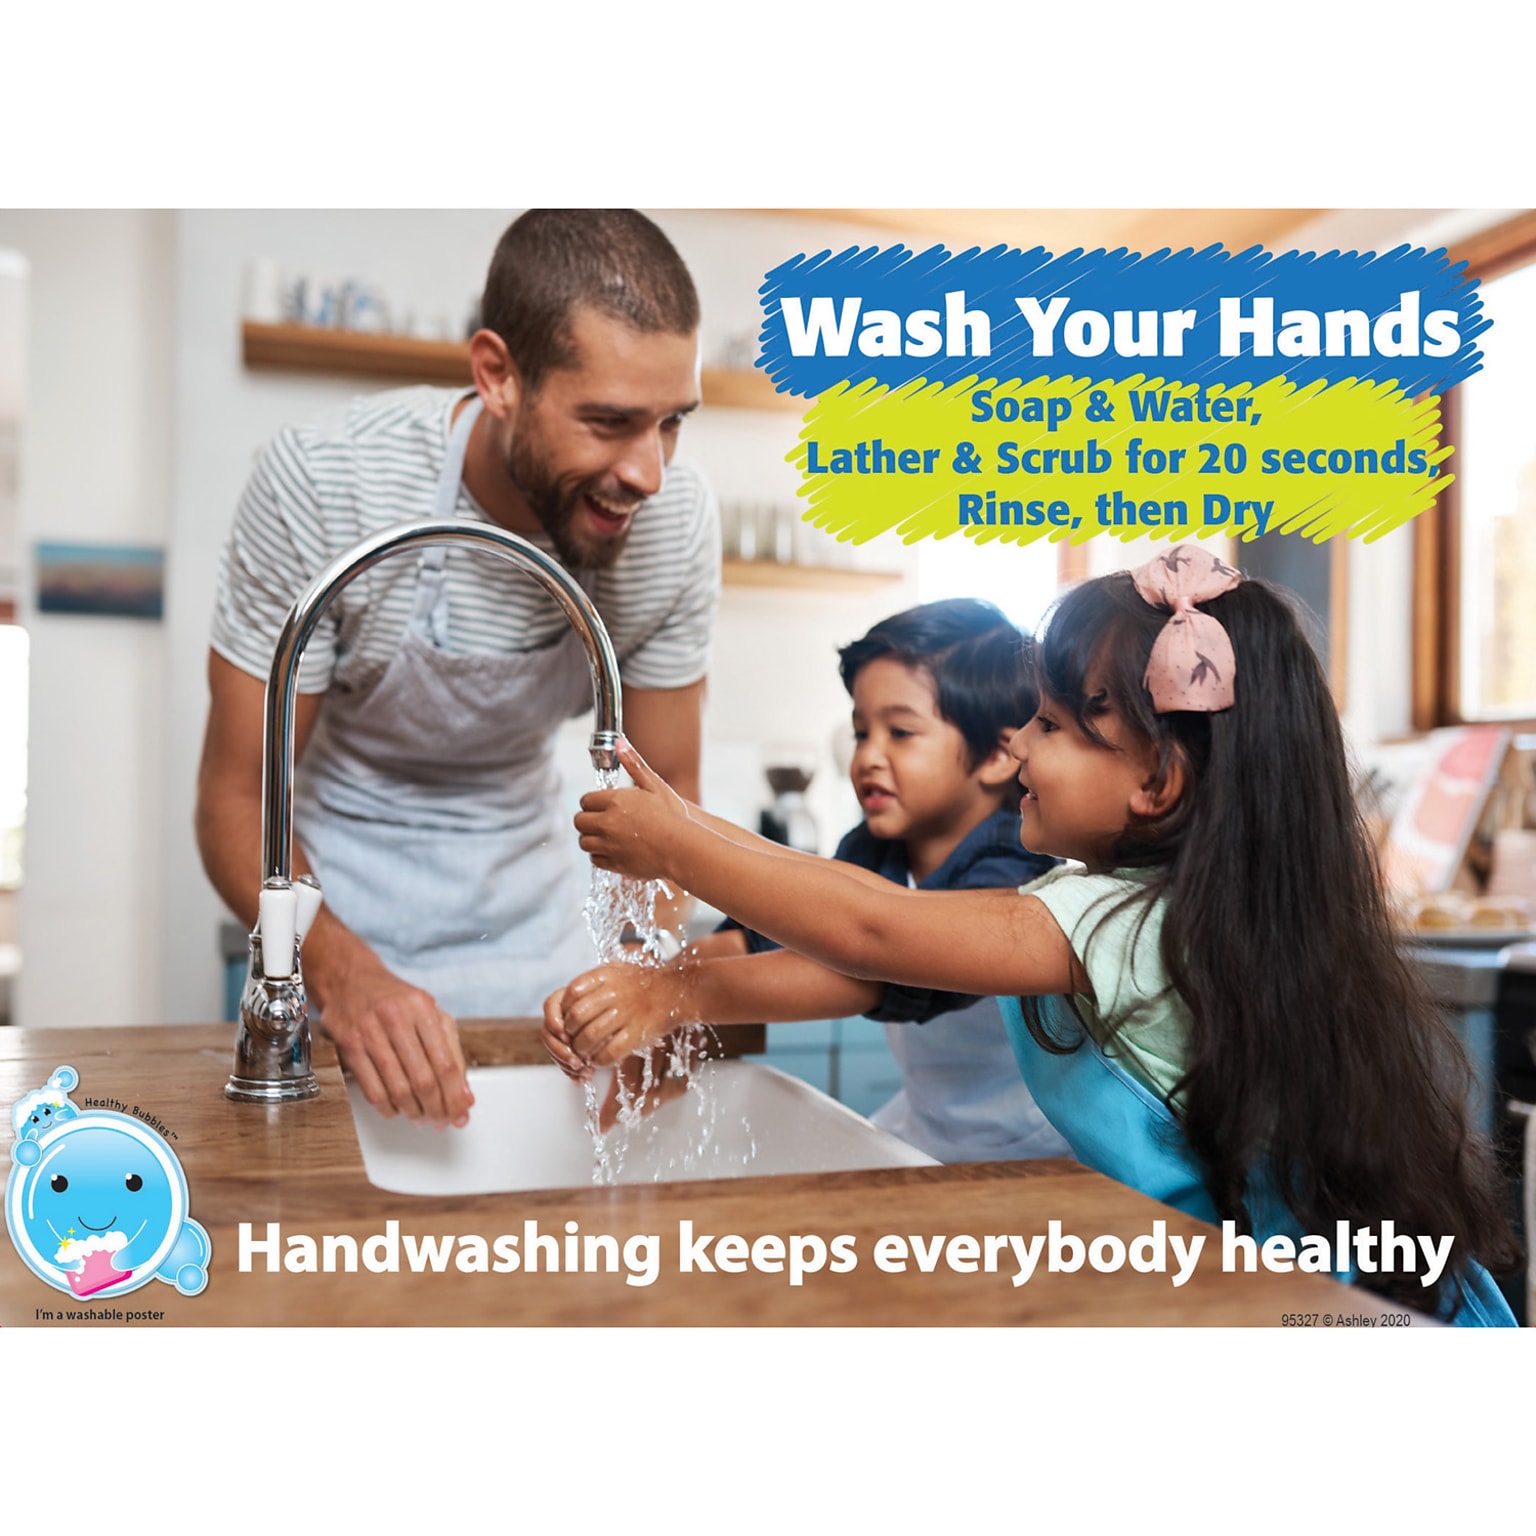 Ashley Productions Smart Poly 13 x 9.5Healthy Bubbles Handwashing Keeps Everybody Healthy PosterMat Pals (ASH95327)